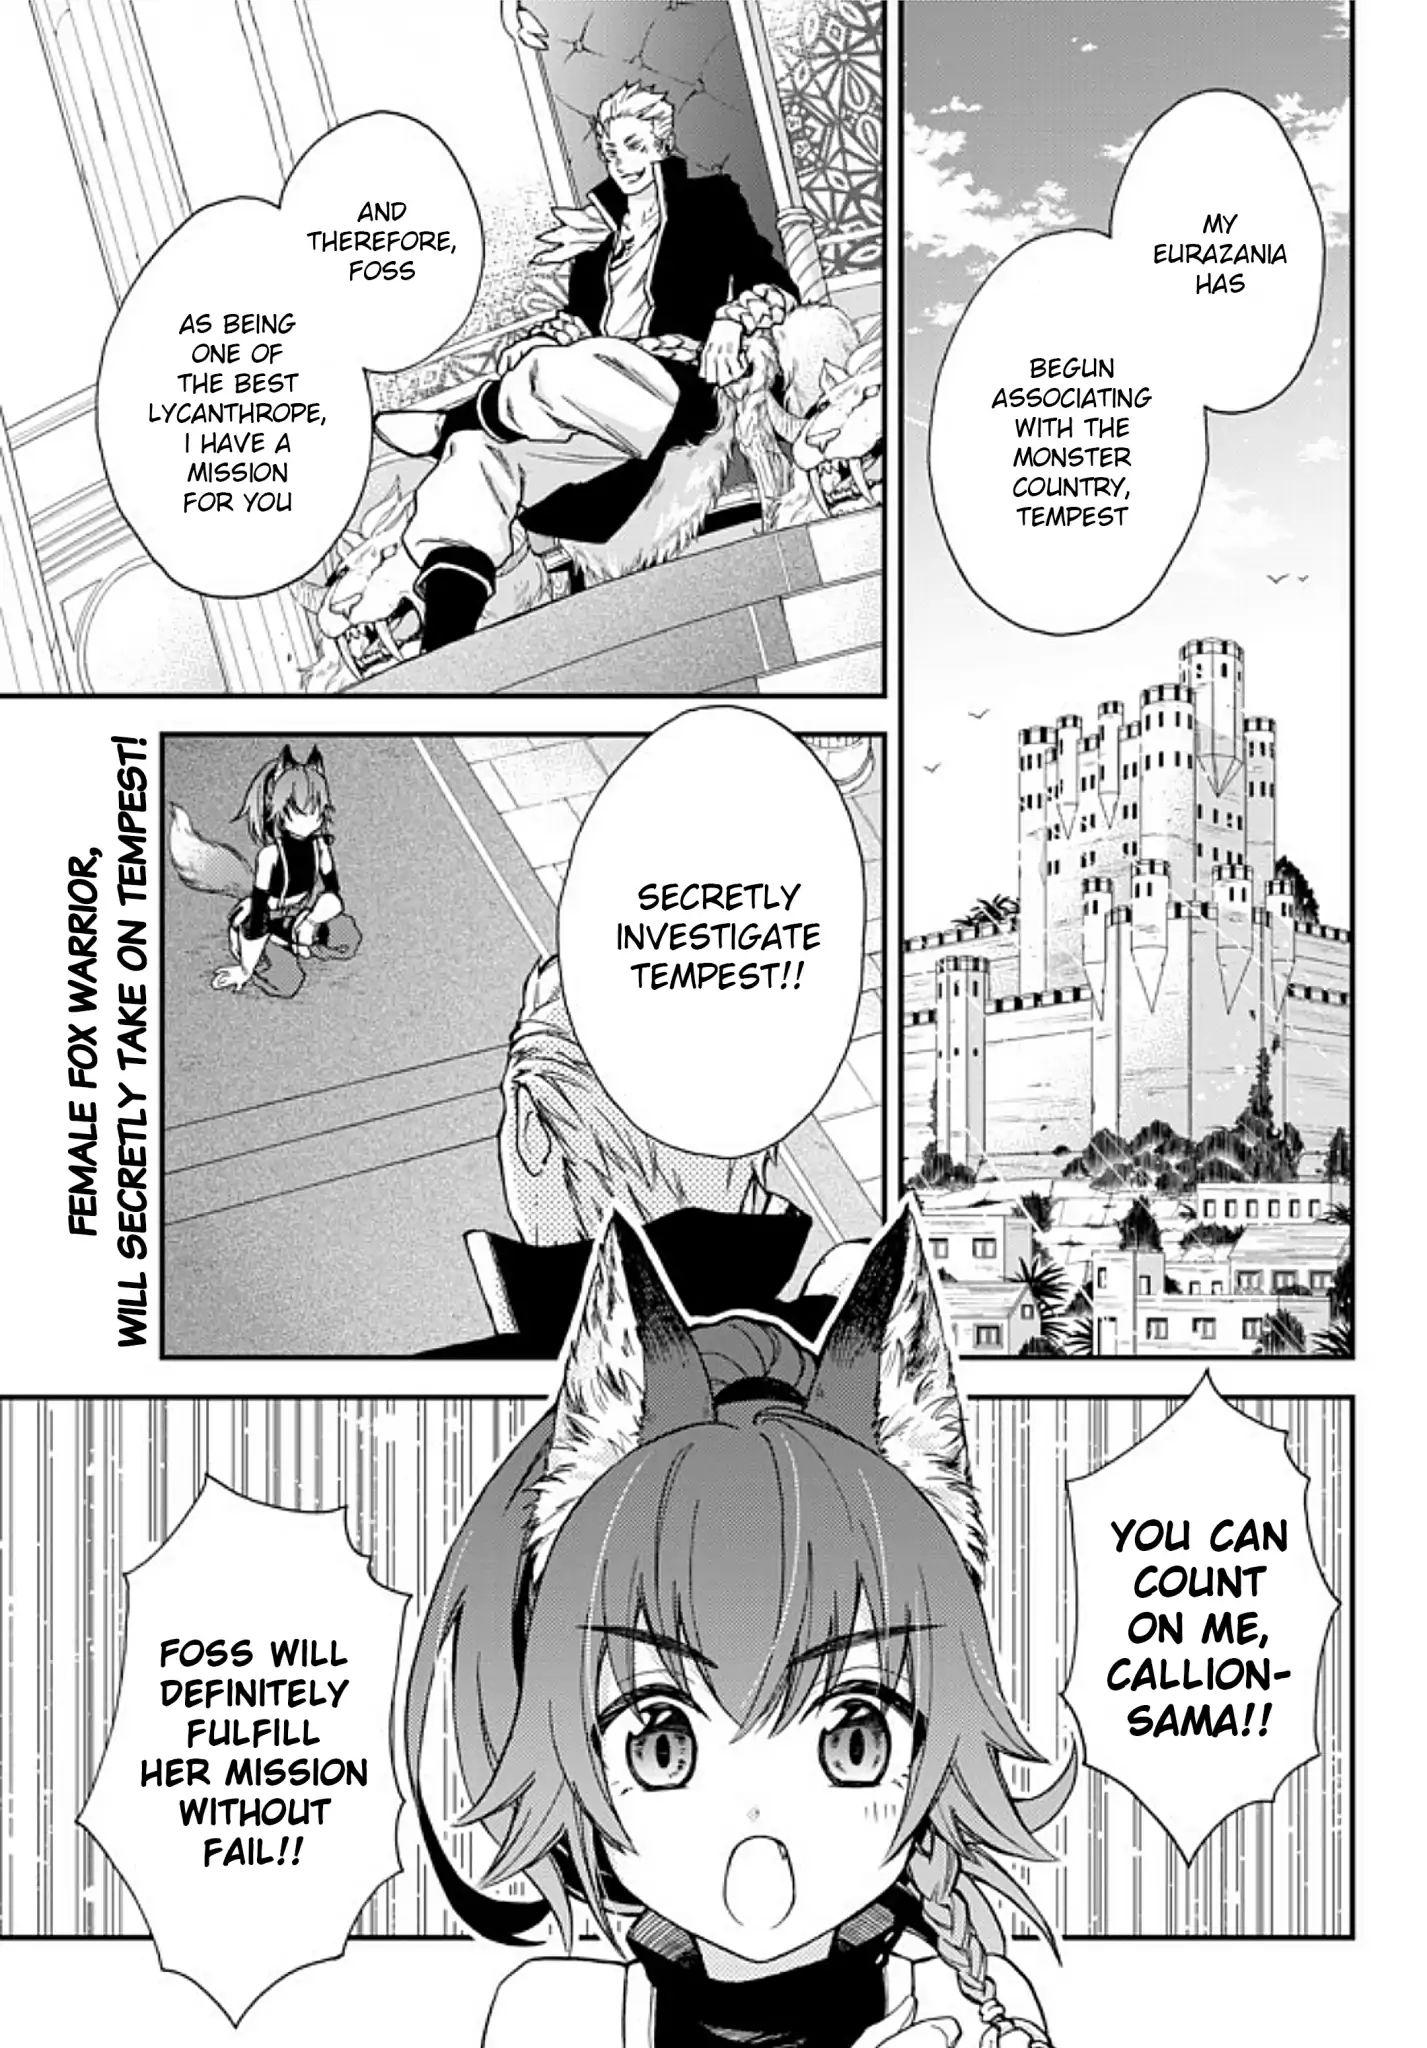 That Time I Got Reincarnated as a Slime: Trinity in Tempest, Vol